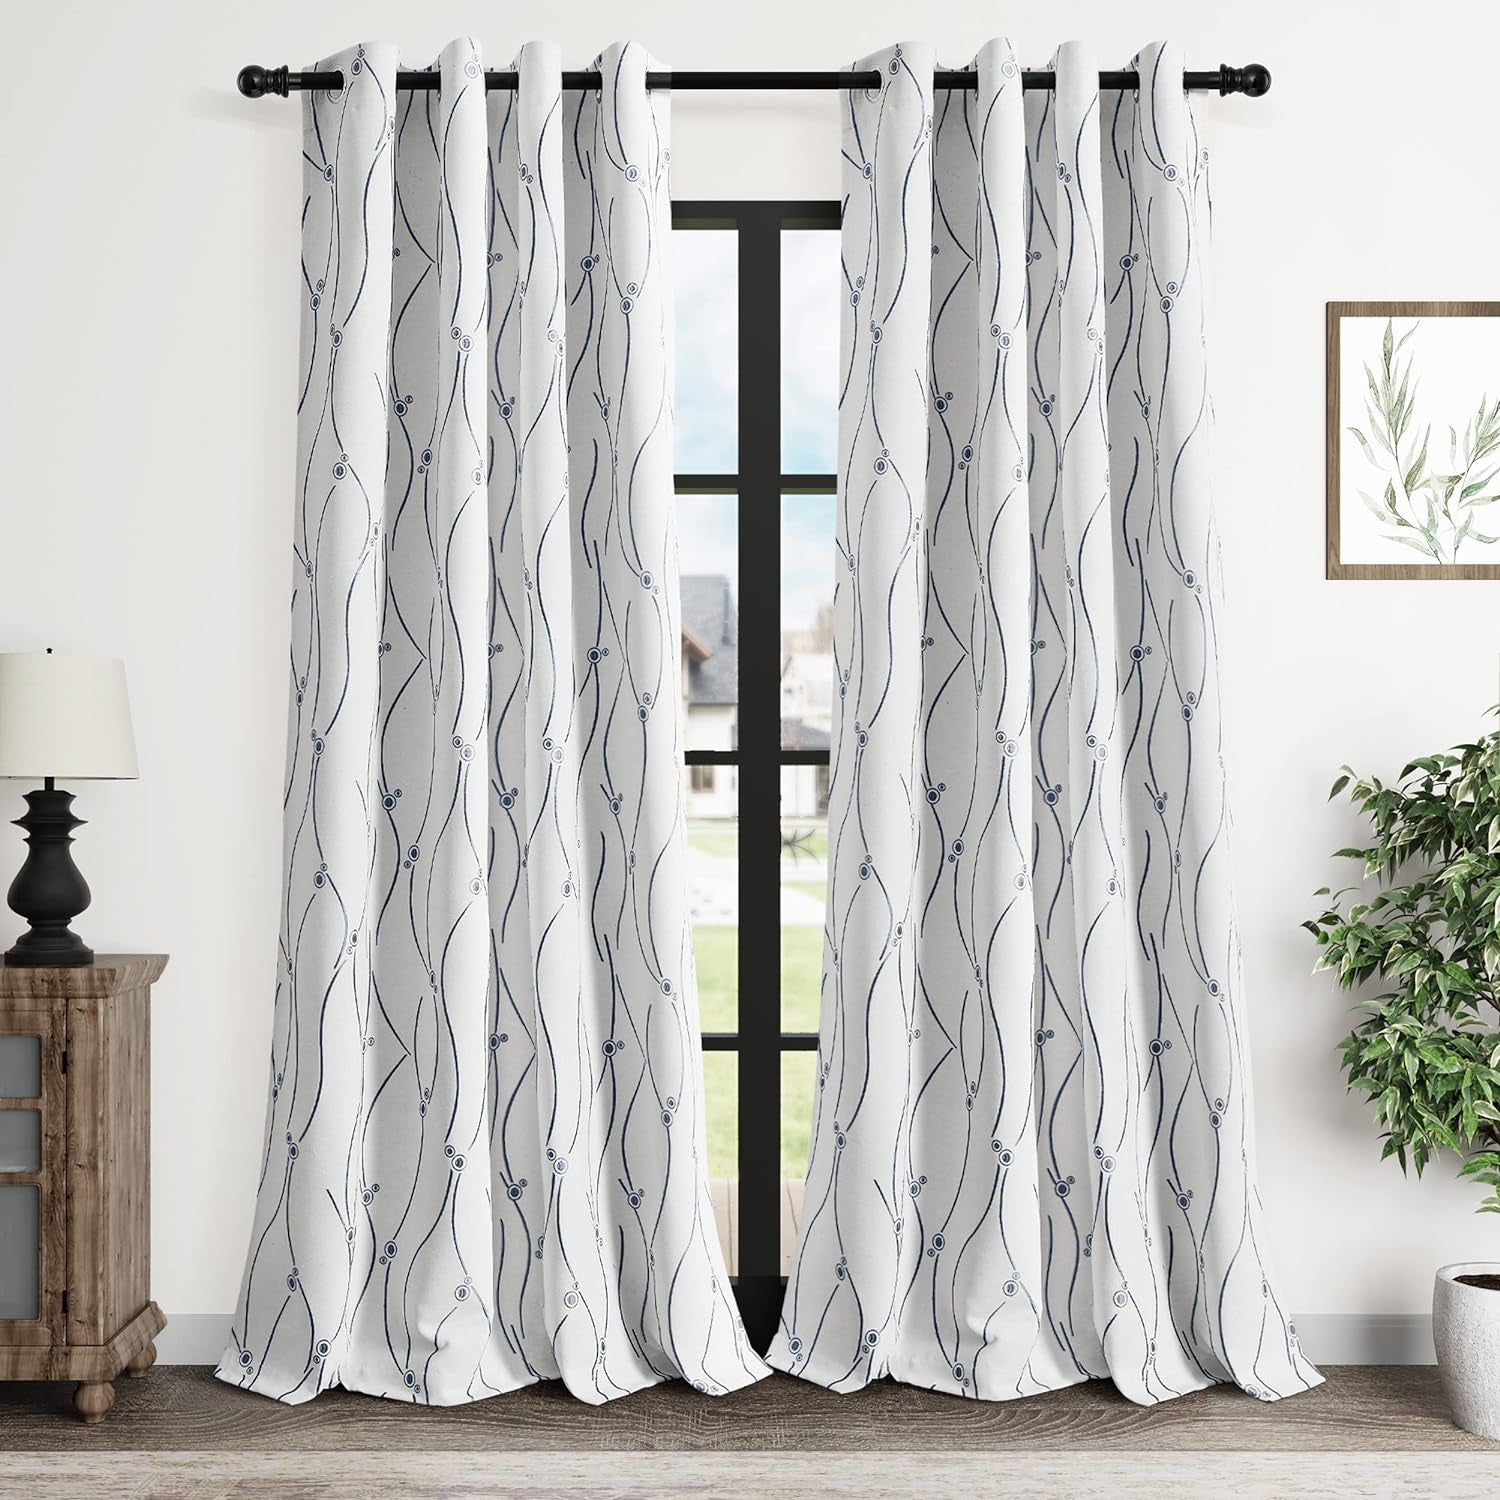 Linen Textured Curtains 84 Inches Long for Living Room Embroidered Room Darkening Window Curtains for Bedroom Neutral Cream Modern Farmhouse Curtain Beige Grommet Draperies Black Patterned Jacquard  Nanspring   